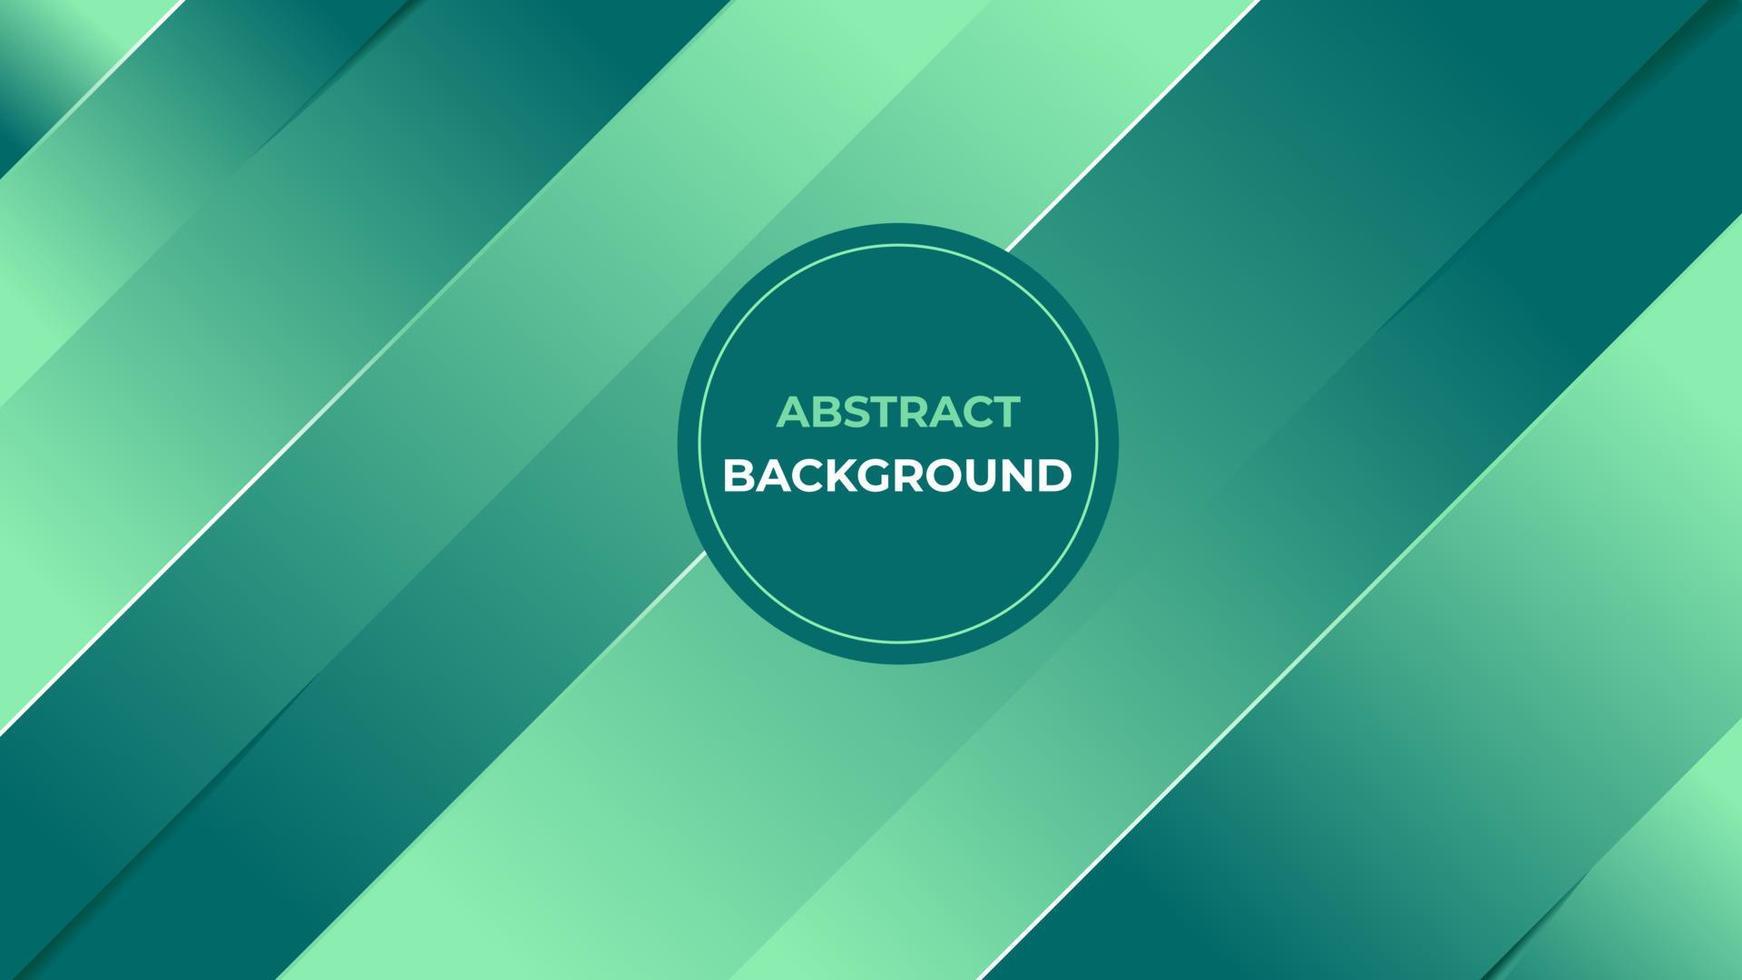 Minimalist abstract background. With Mint Green color and geometric shapes. Suitable for background, banners, cover, etc. vector